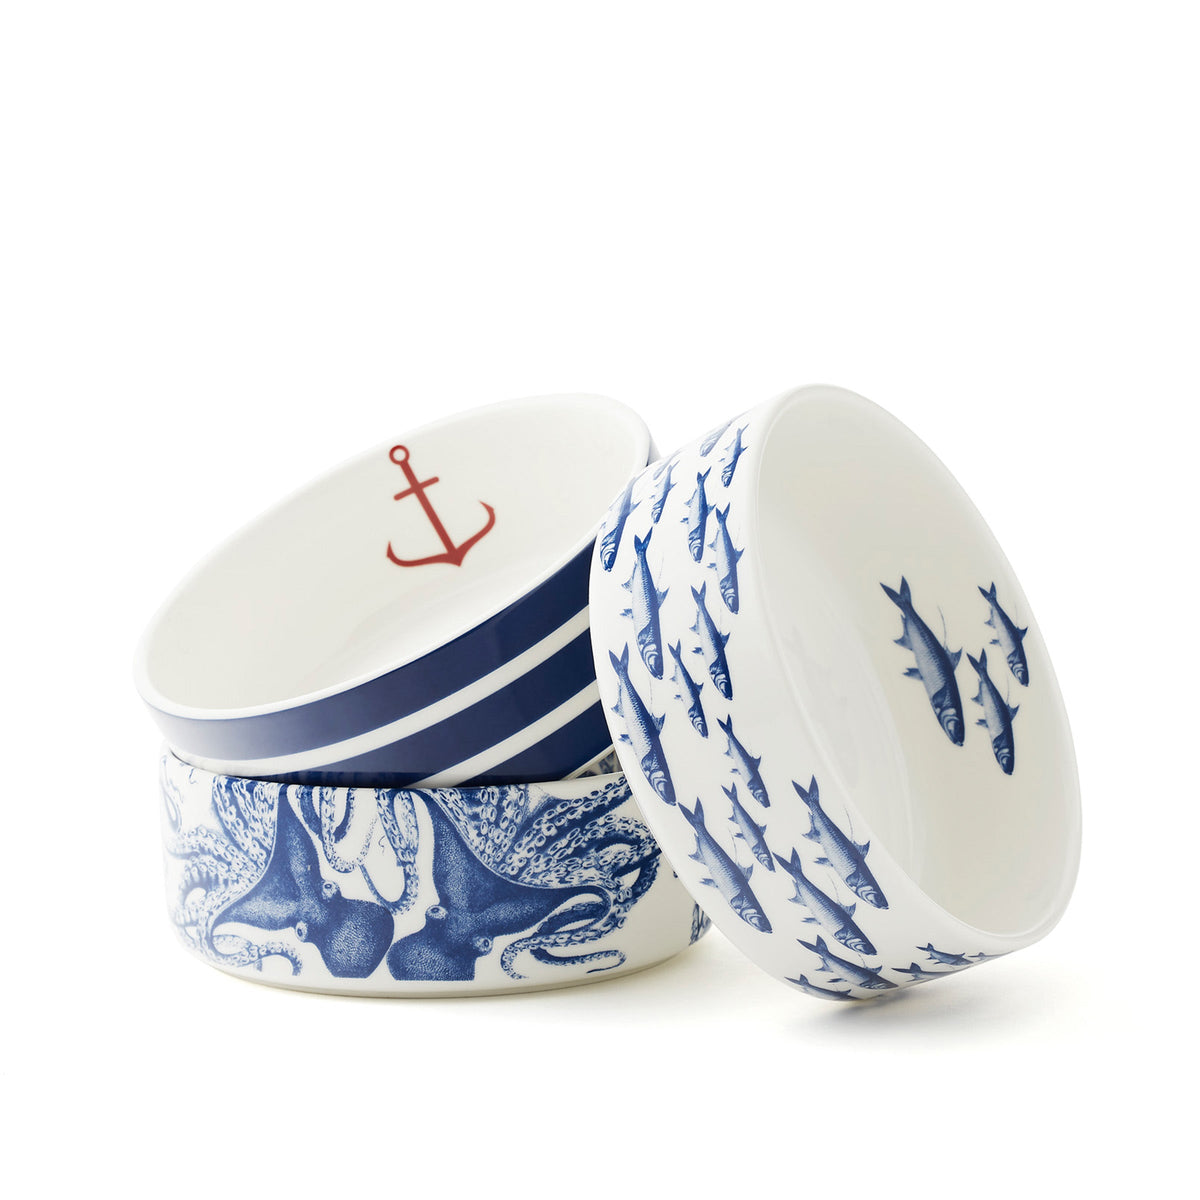 Three School of Fish Large Pet Bowls by Caskata, with anchors on them, made of premium porcelain.